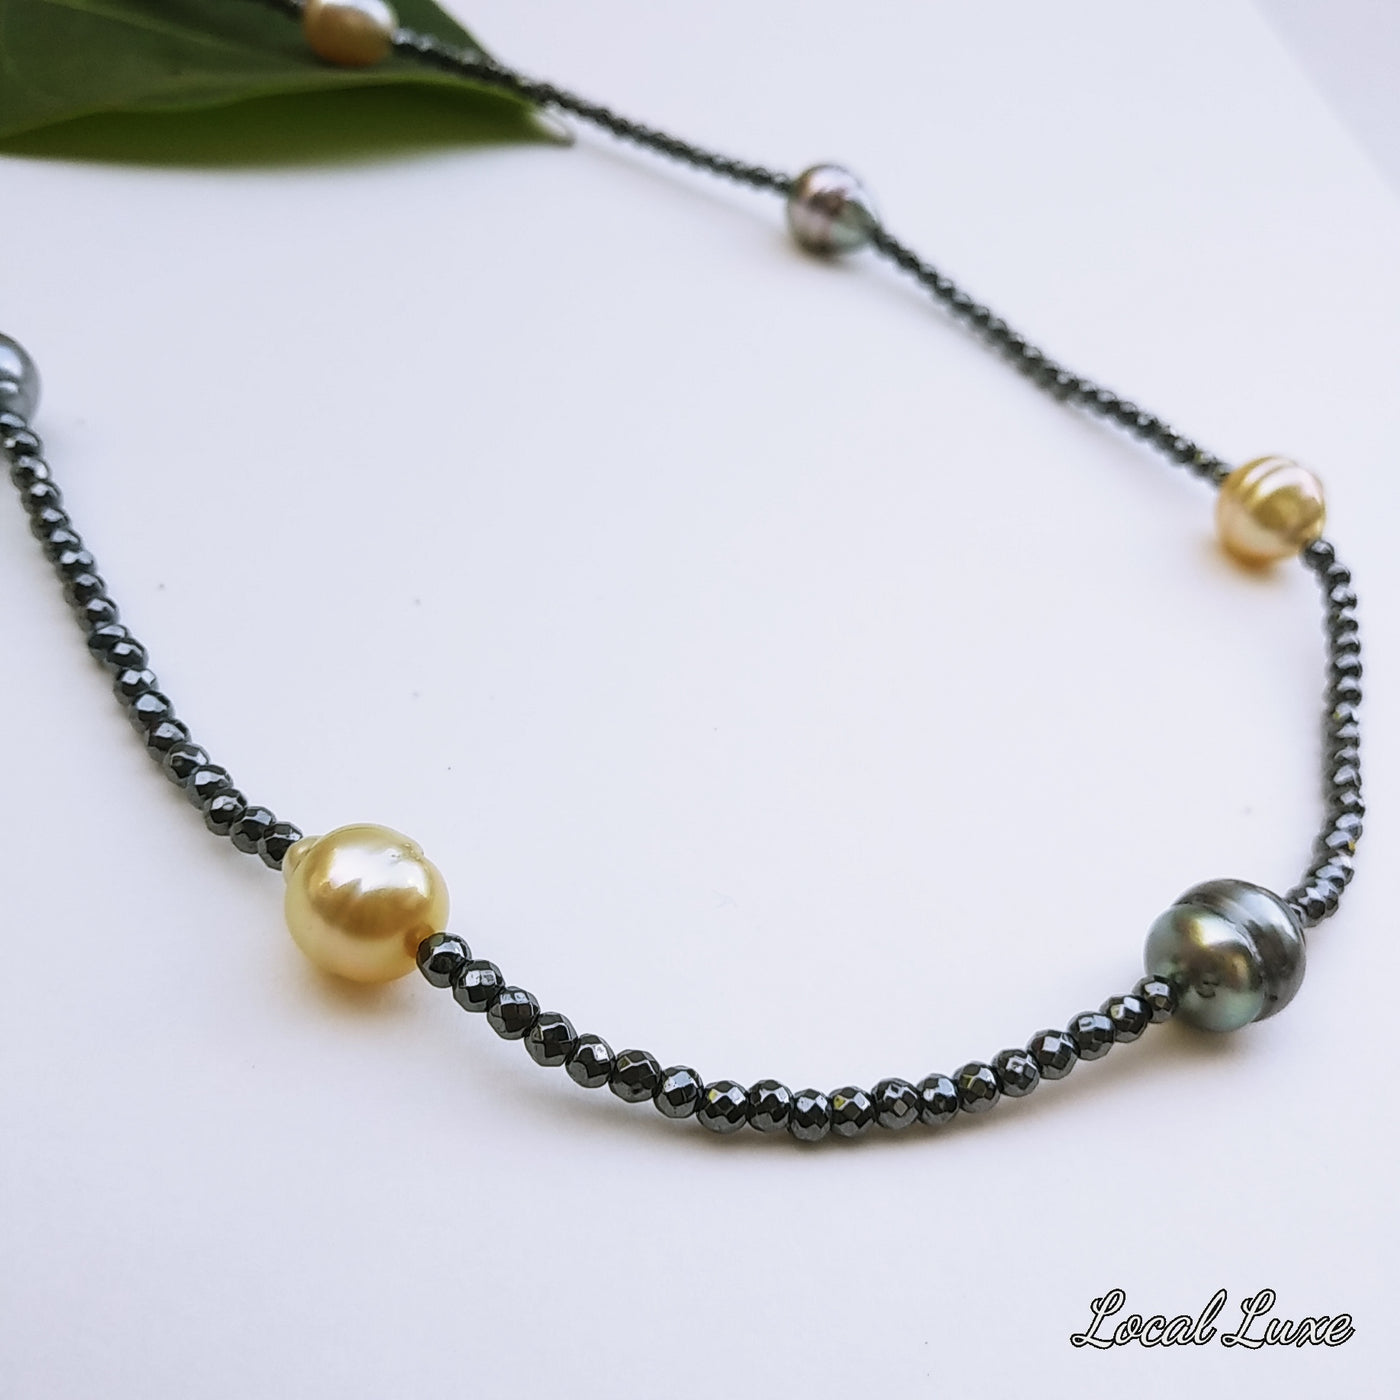 "The Space Between" Necklace - Tahitian & South Sea Pearls, Hematite